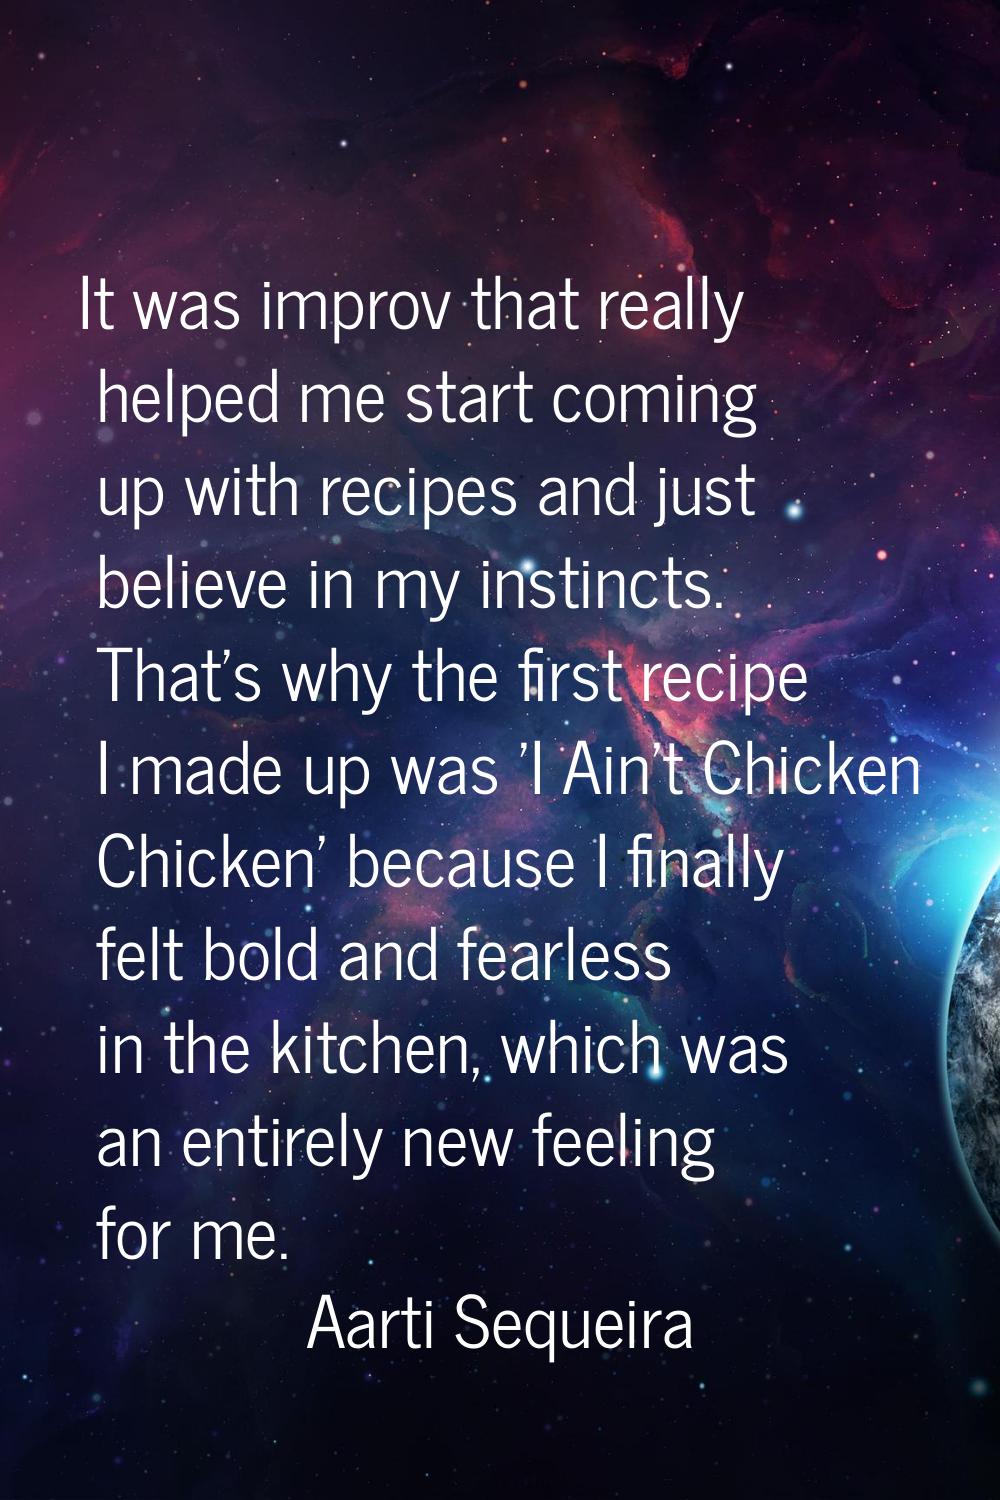 It was improv that really helped me start coming up with recipes and just believe in my instincts. 